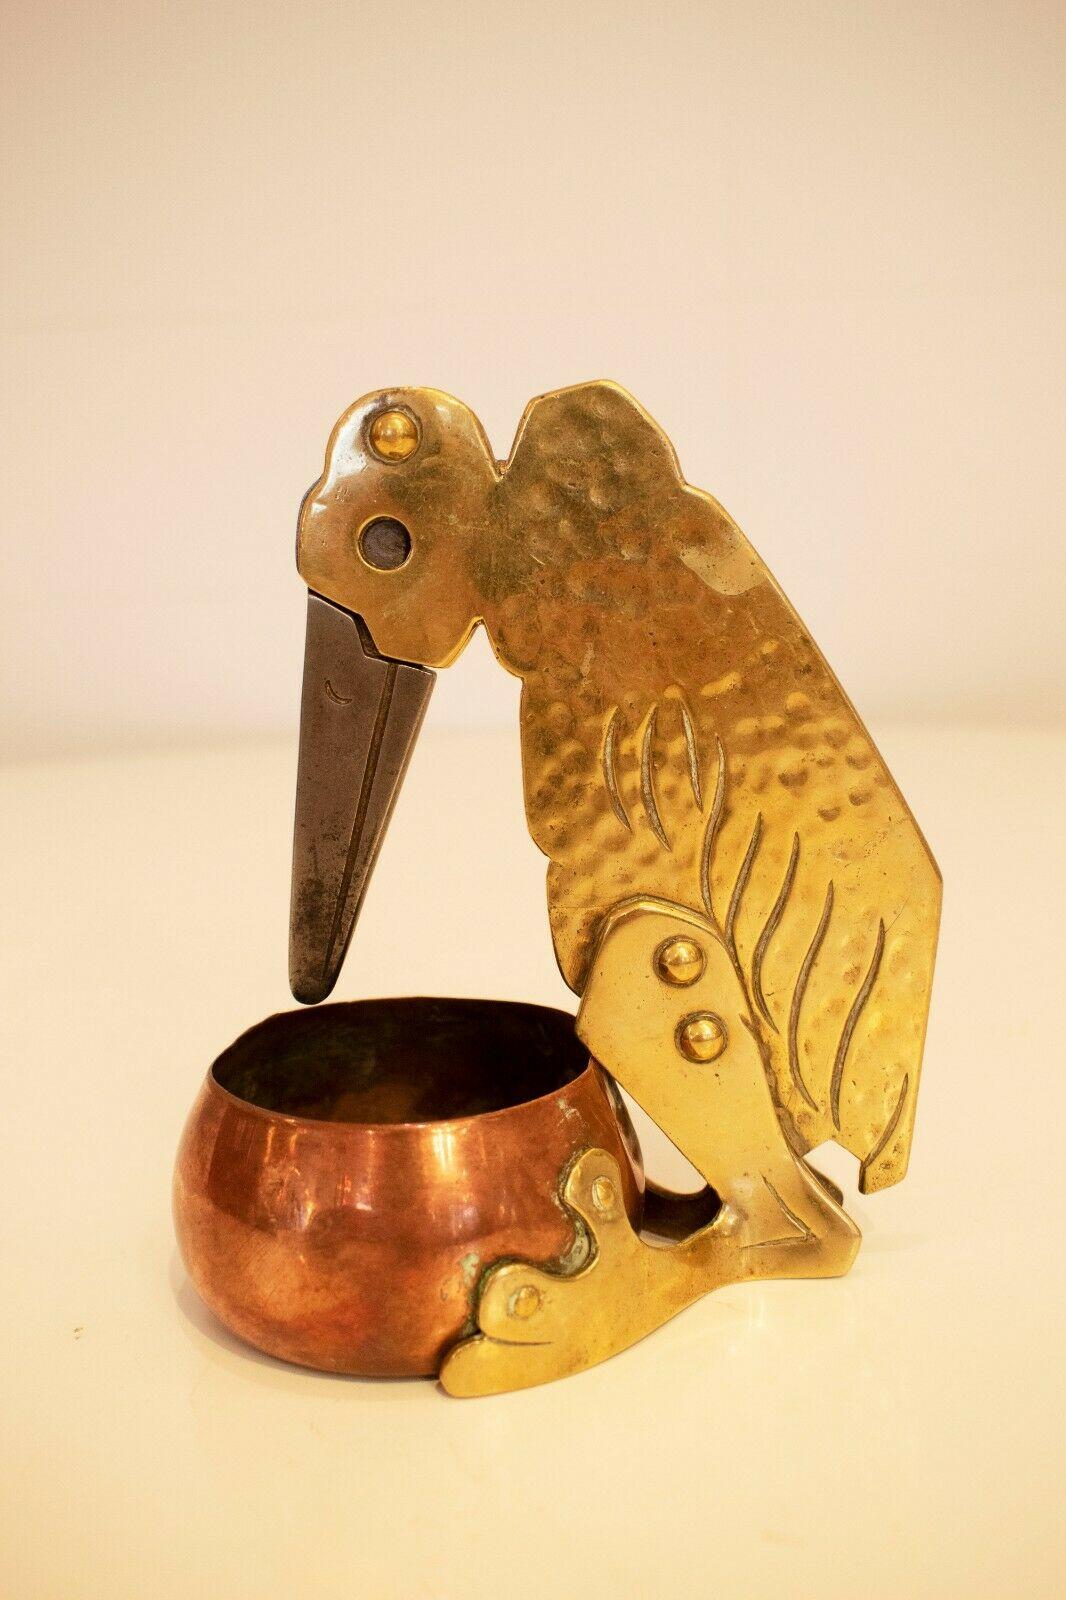 A very decorative and rare Art Nouveau copper cigar cutter, in the shape of an exotic.

Whimsical and fun, this cigar cutter was designed and made by Ignatius Tascher.

This designer (1871-1913) was part of the Secession in Munich and was also